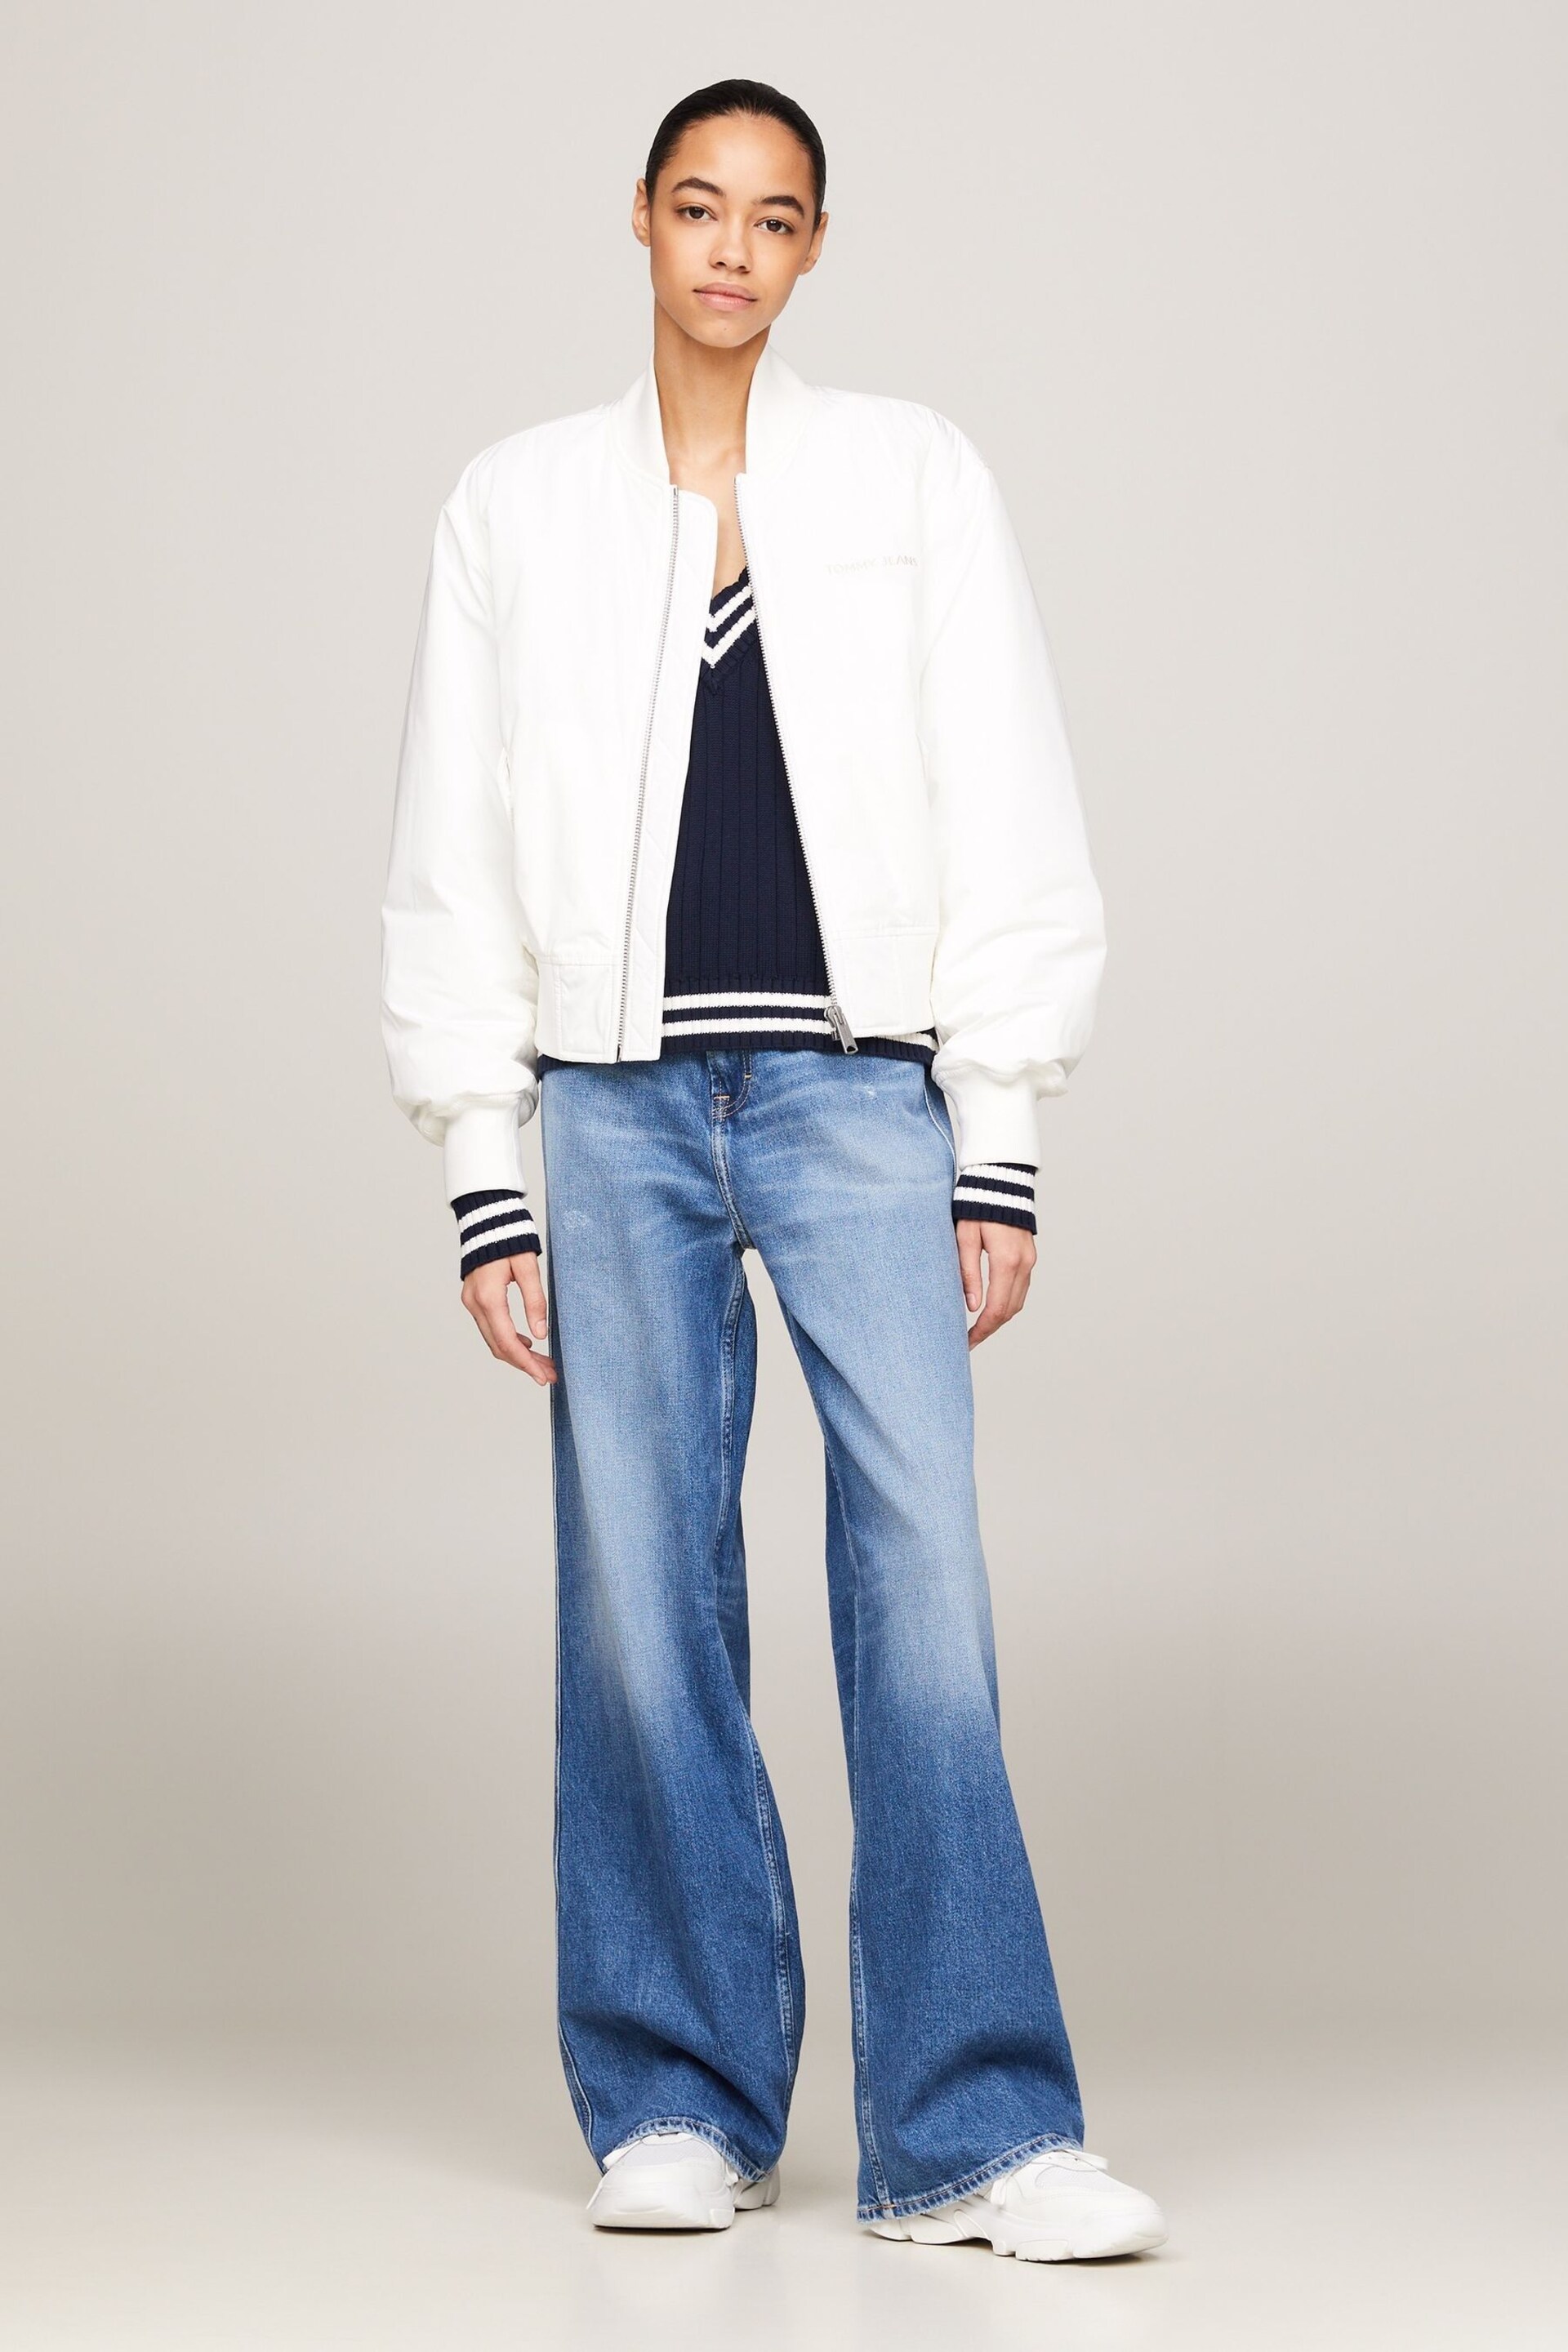 Tommy Jeans Classics Bomber Jacket - Image 2 of 7